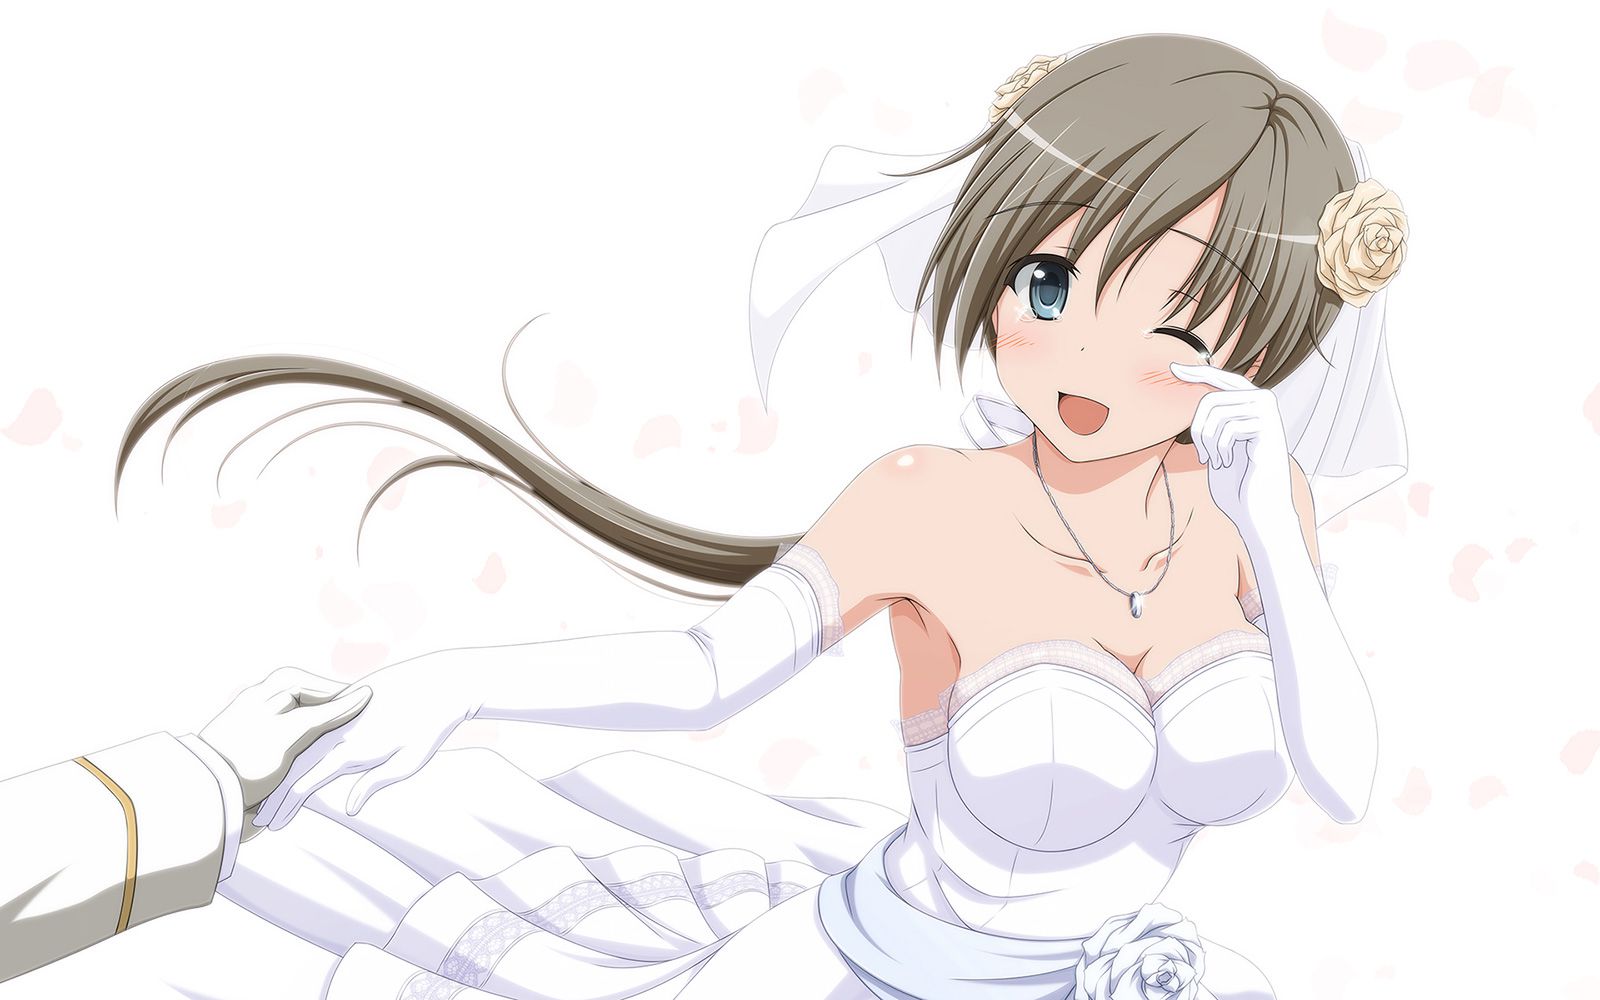 Secondary images of the girl wearing a wedding dress and 4 50 sheets [erotic and non-erotic] 10